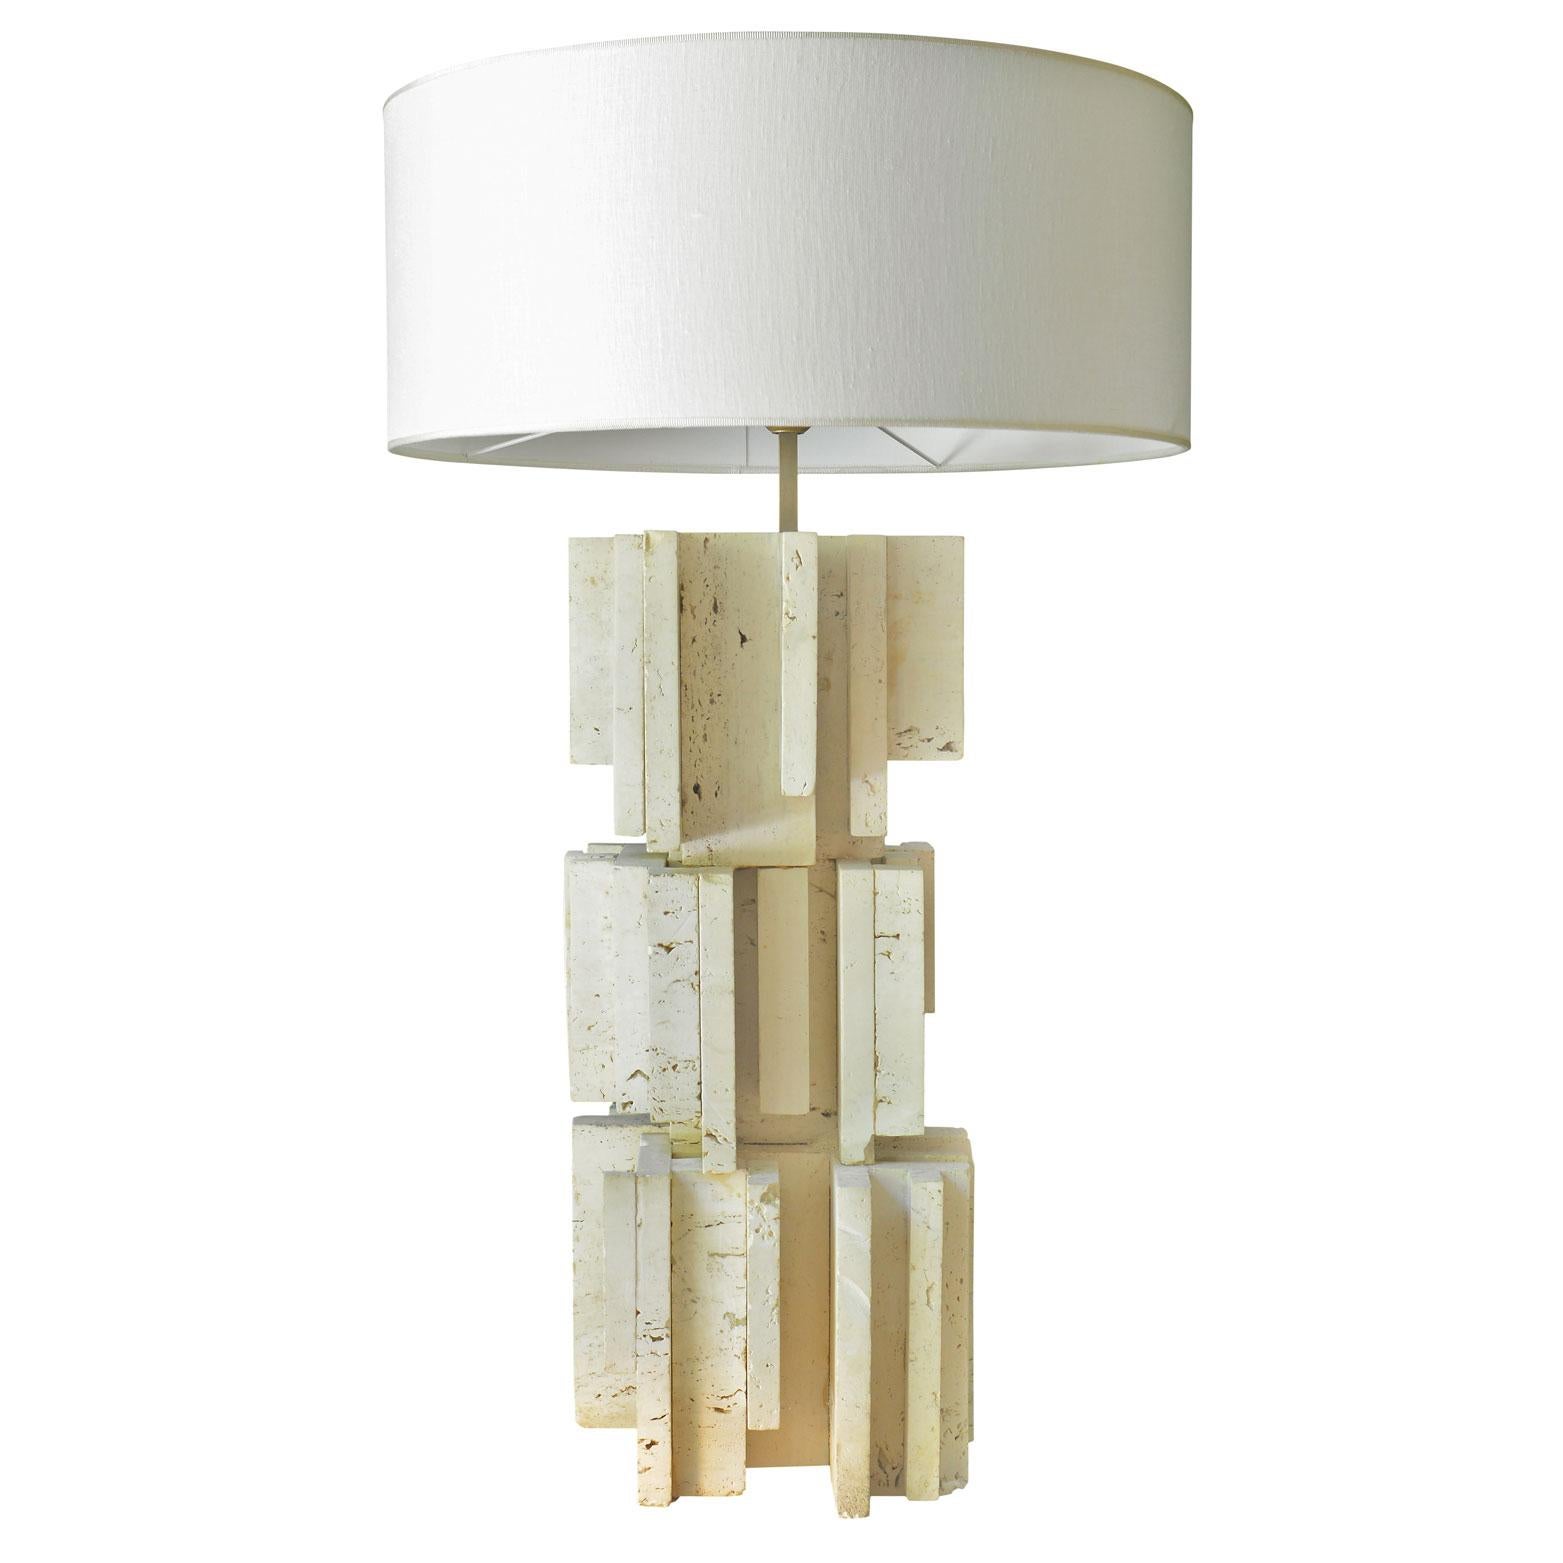 Sculptural Travertine Table Lamp 2, France, 1970s